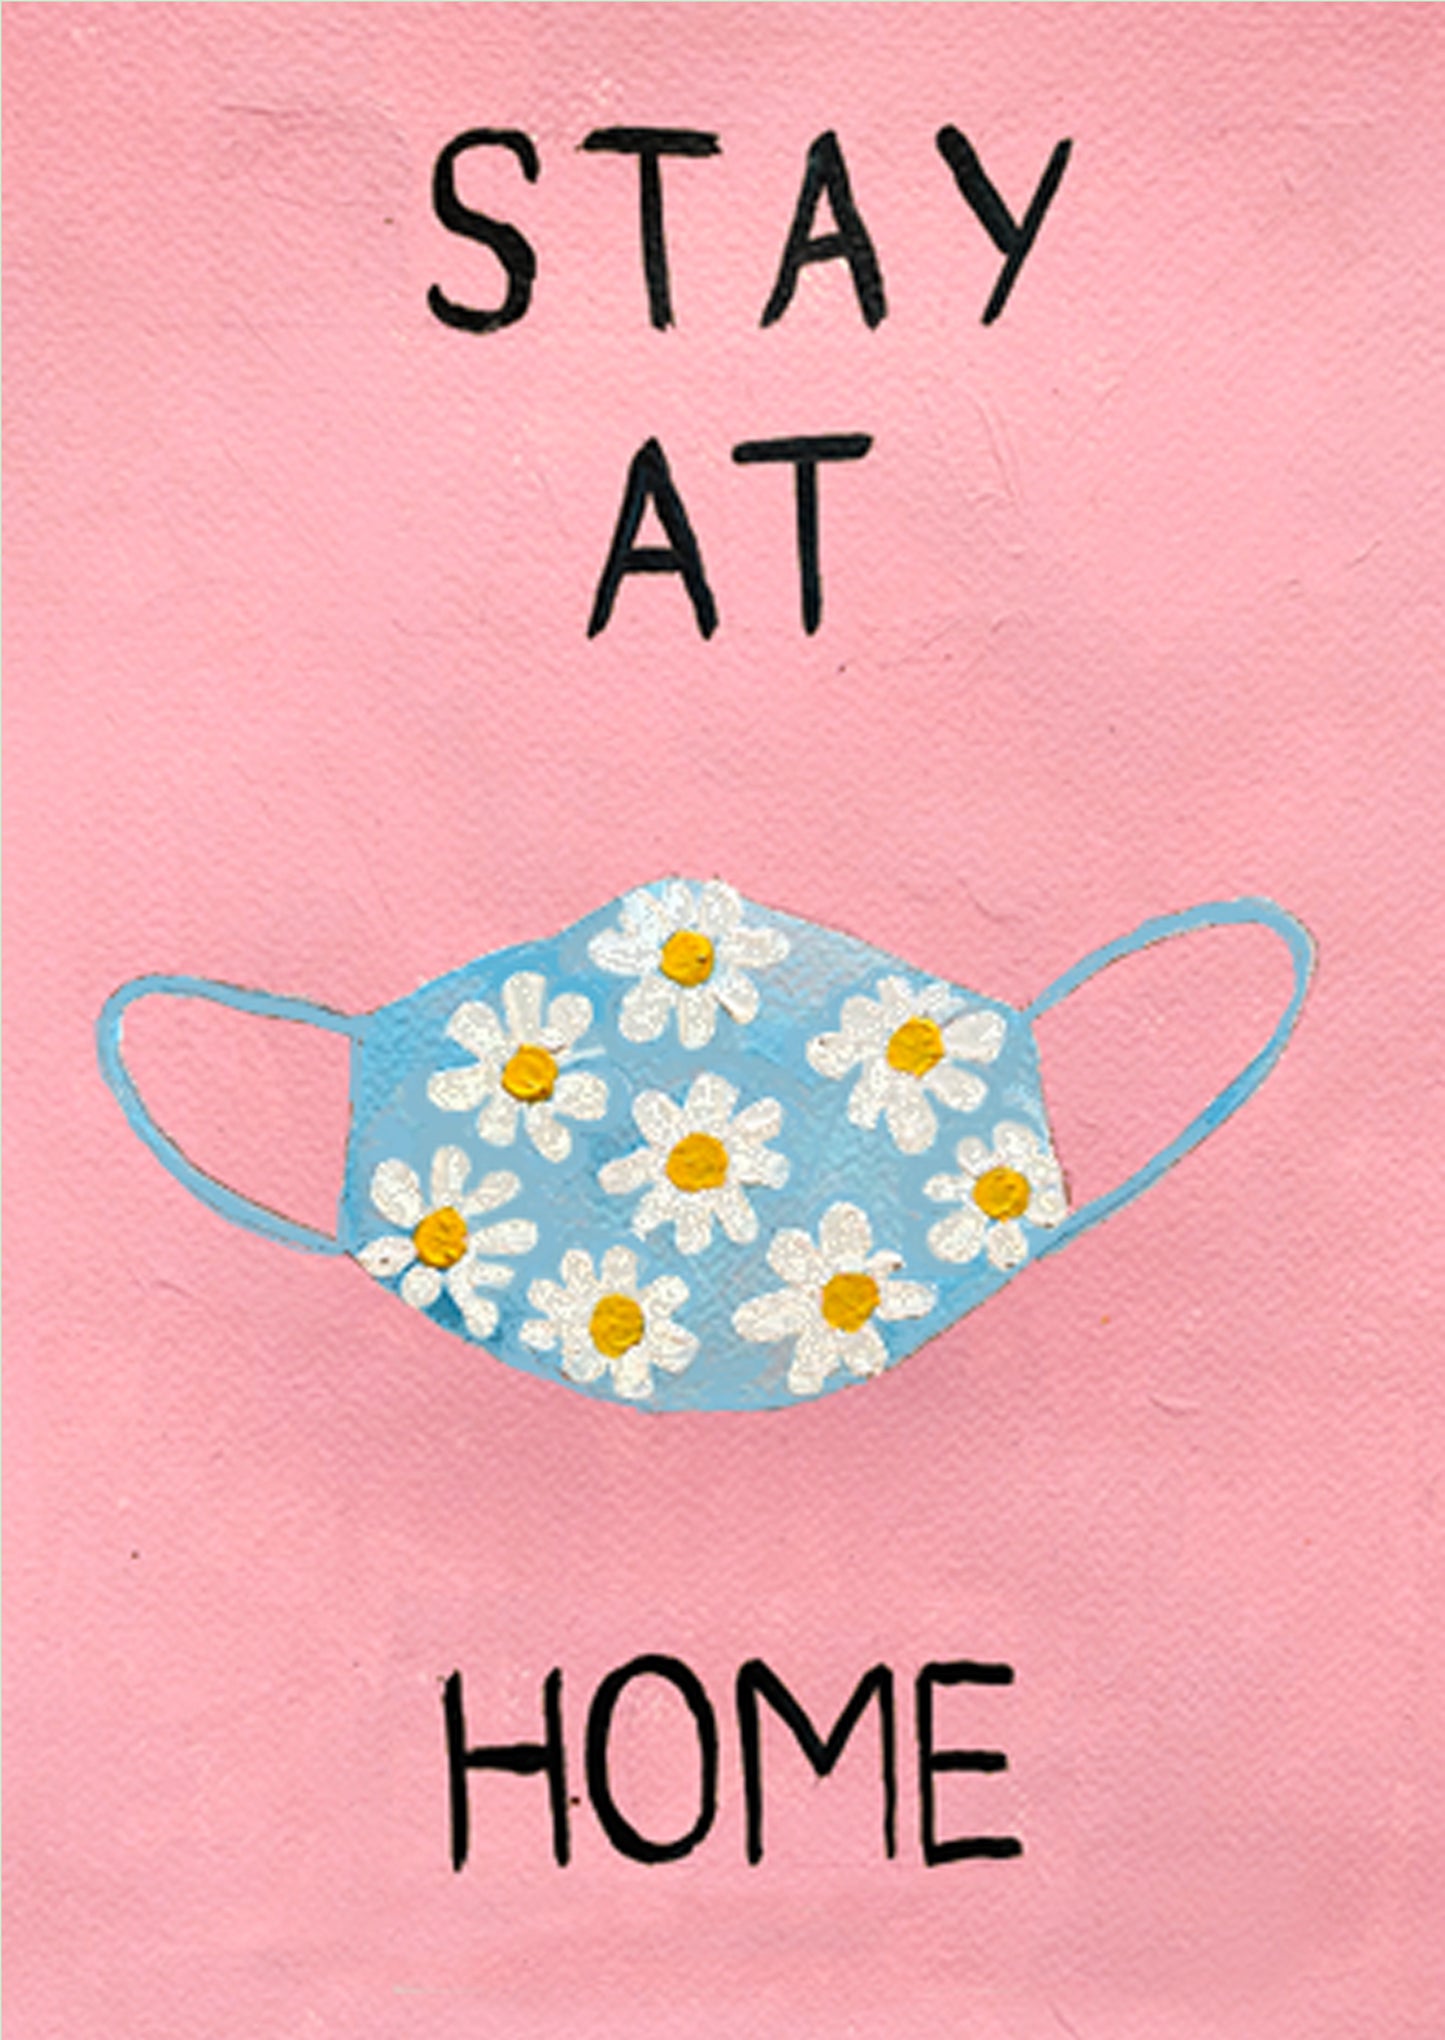 Stay at Home. Original painting